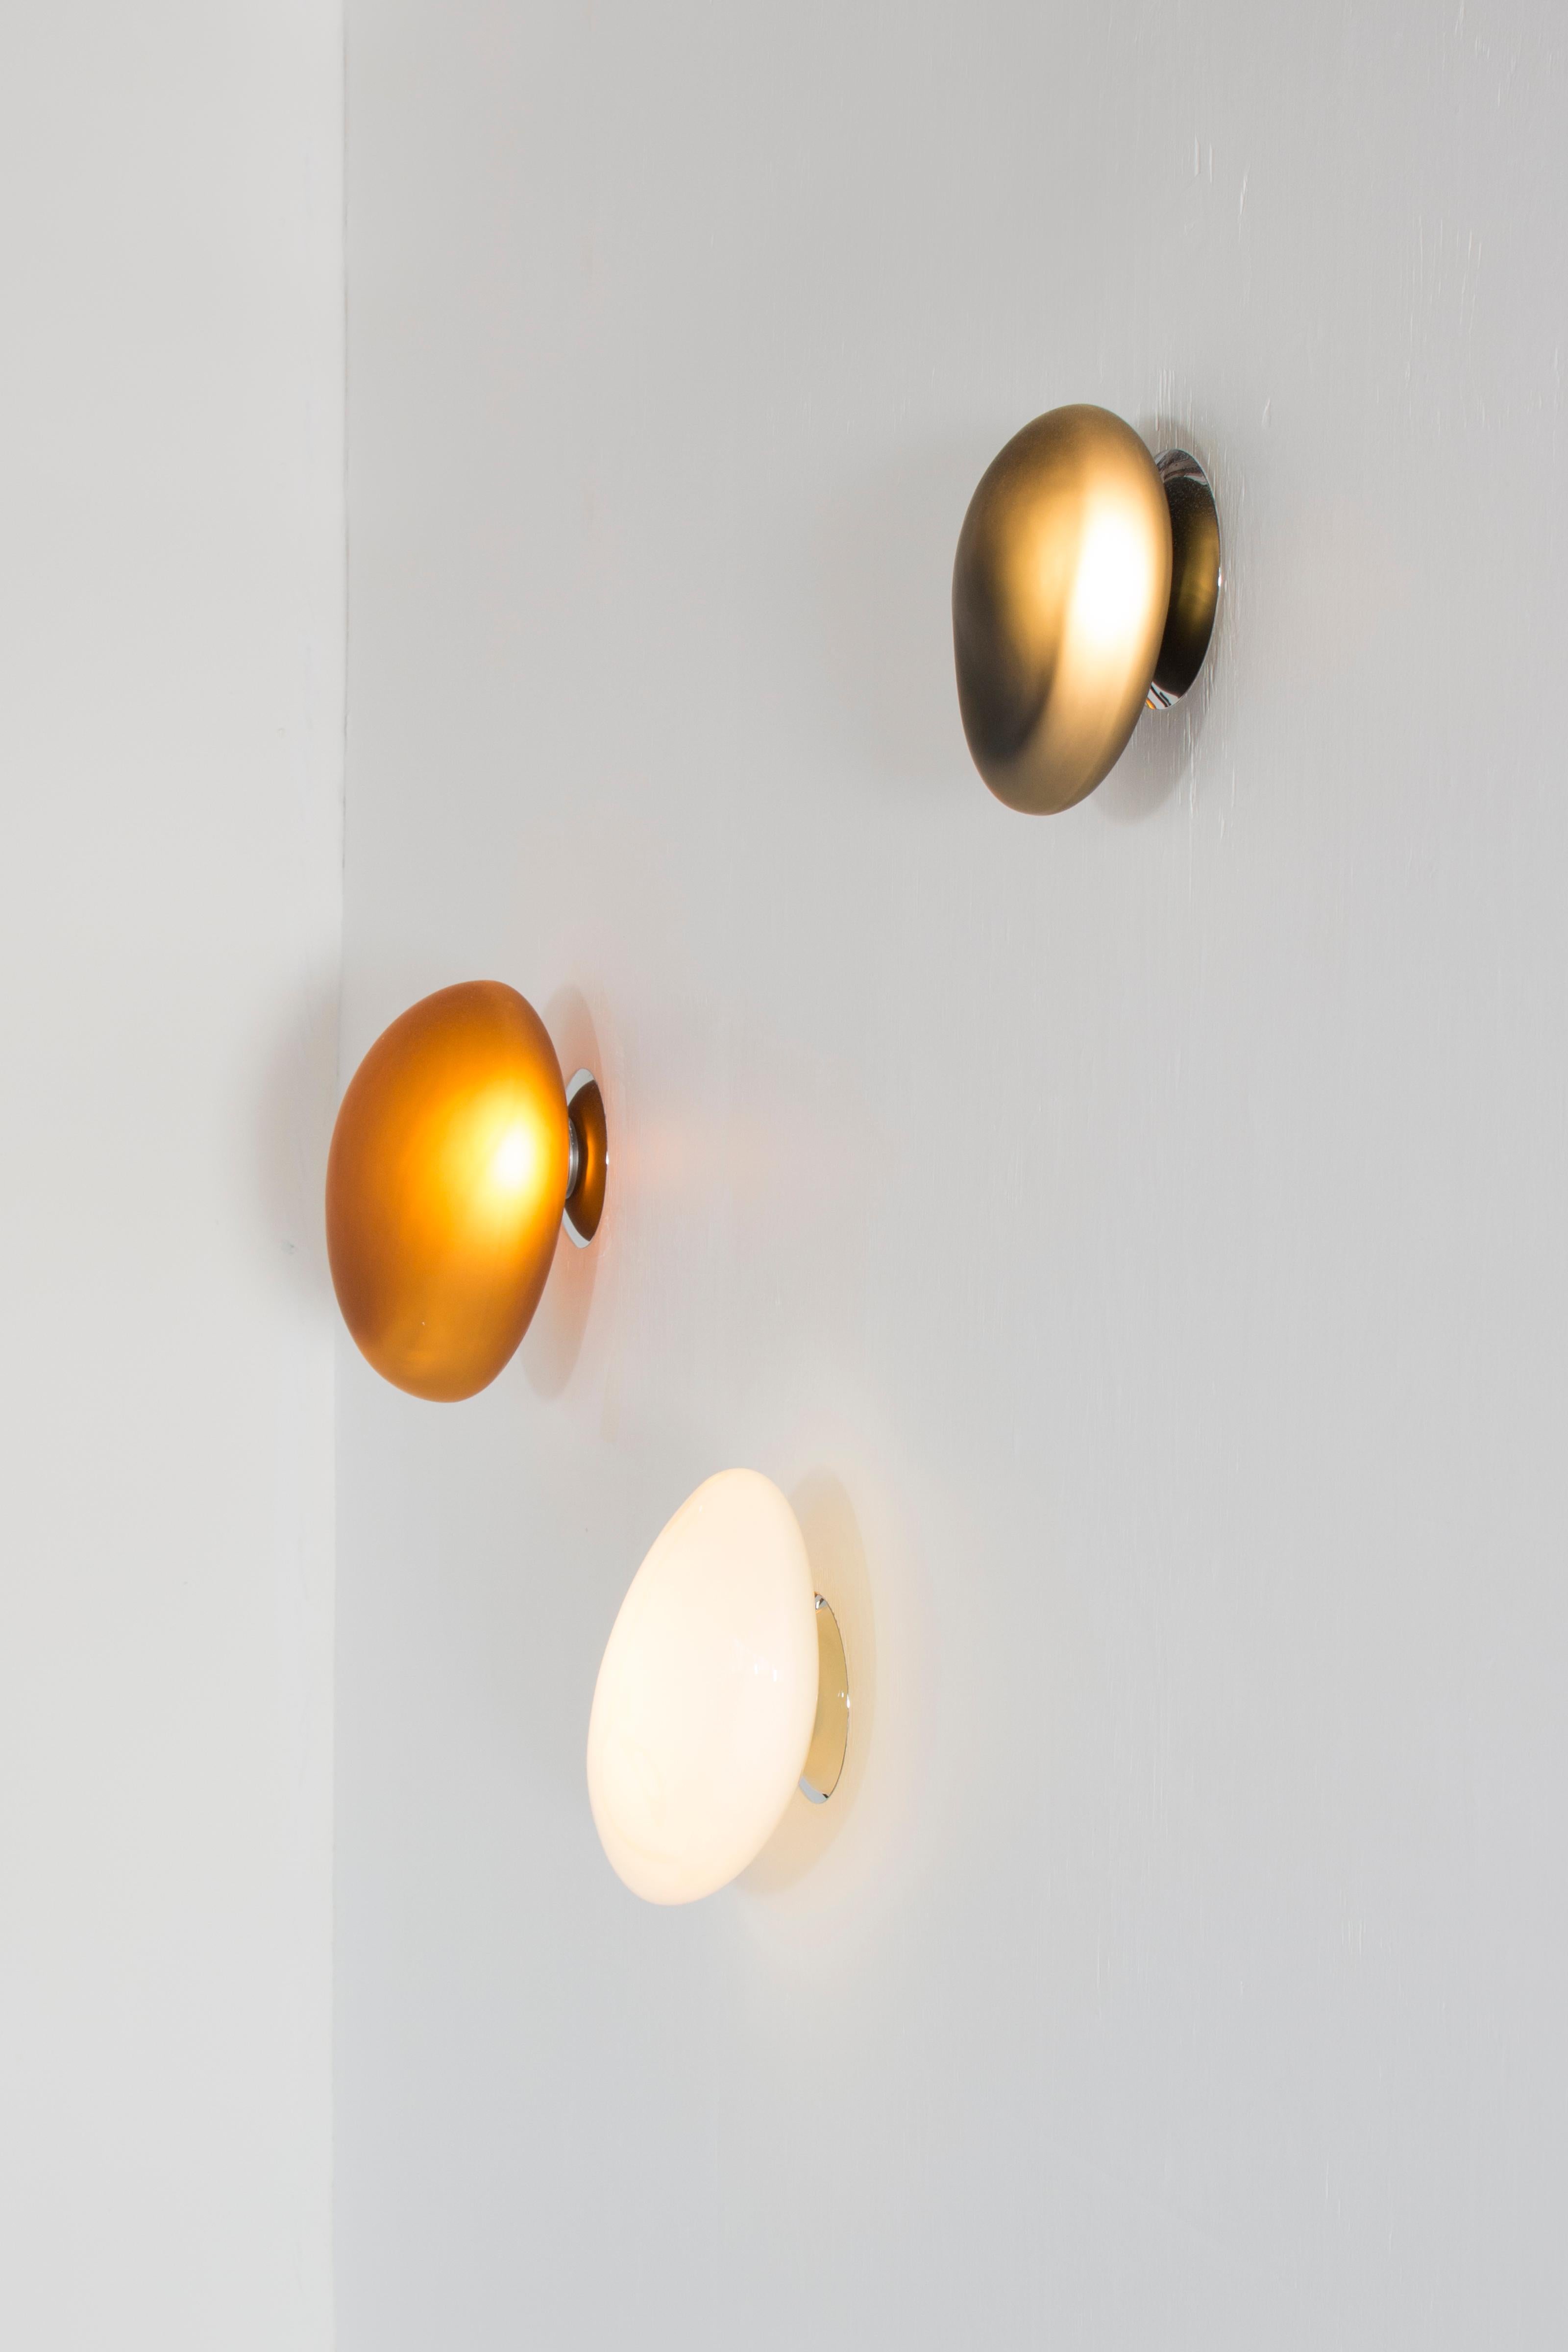 Contemporary Wall Lamp 'Pebble' by Andlight, Shape C, Citrine For Sale 1